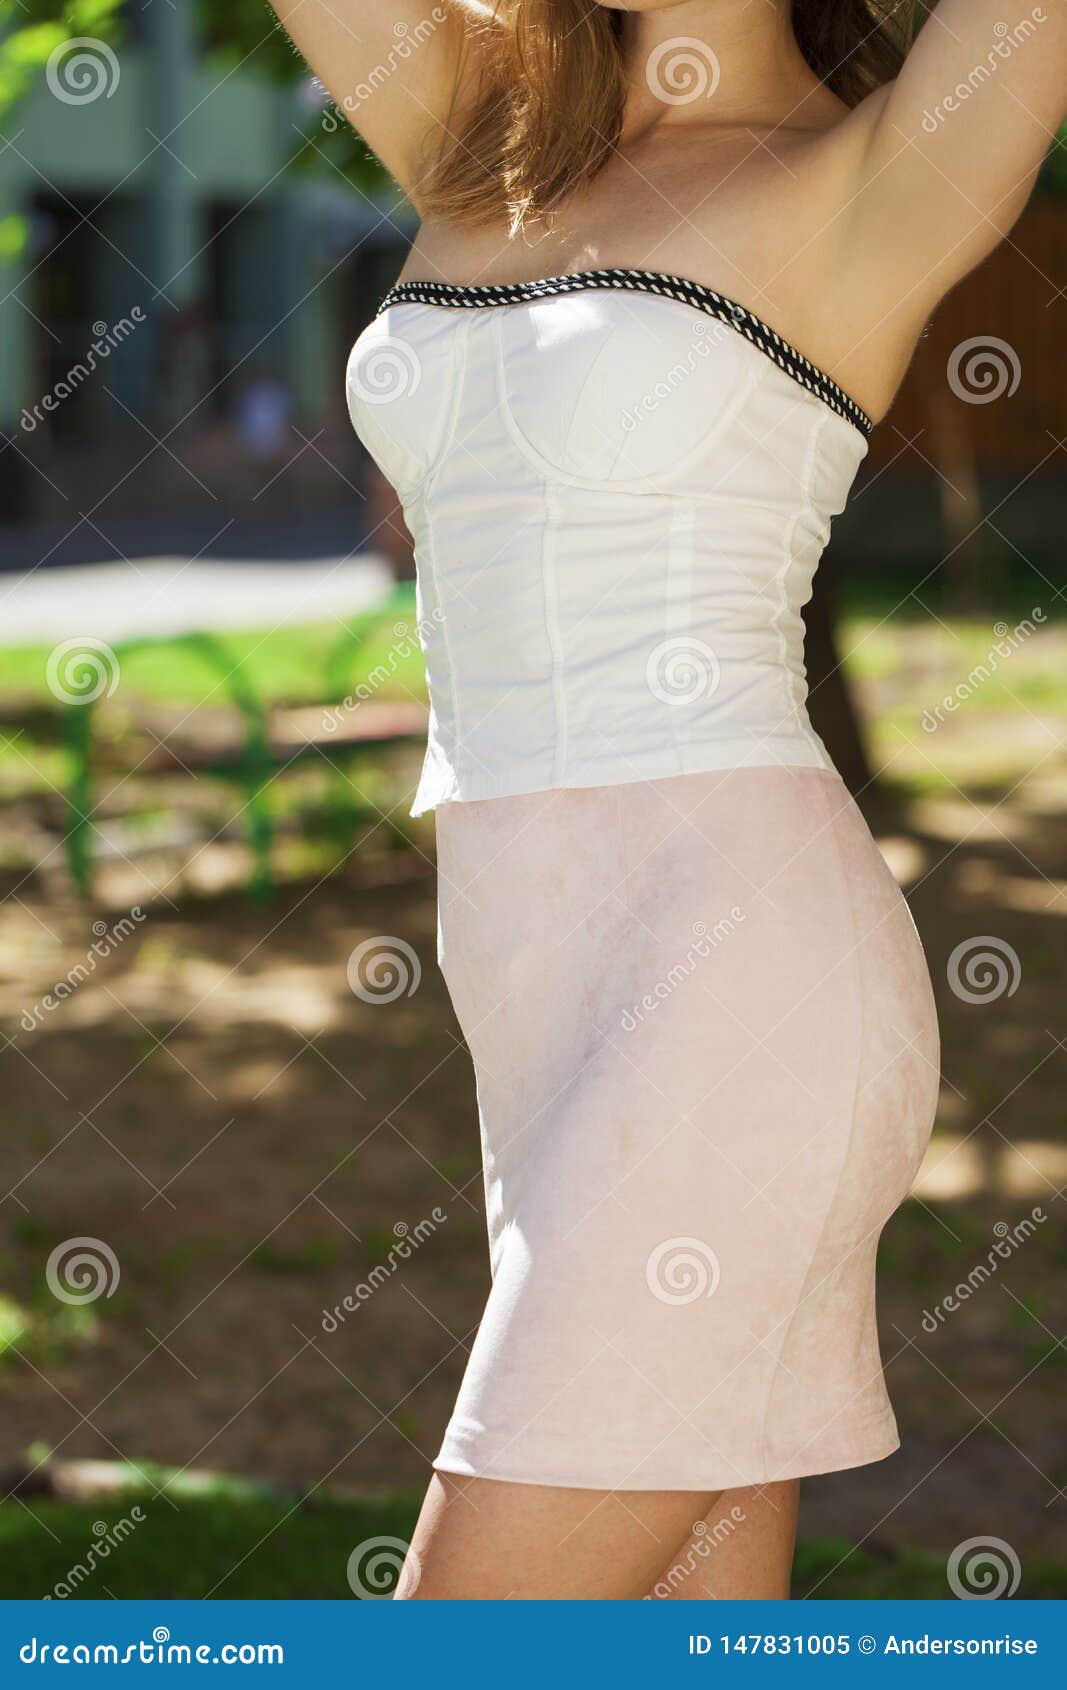 Body part white corset and pink skirt. Fashion street - summer outdoors